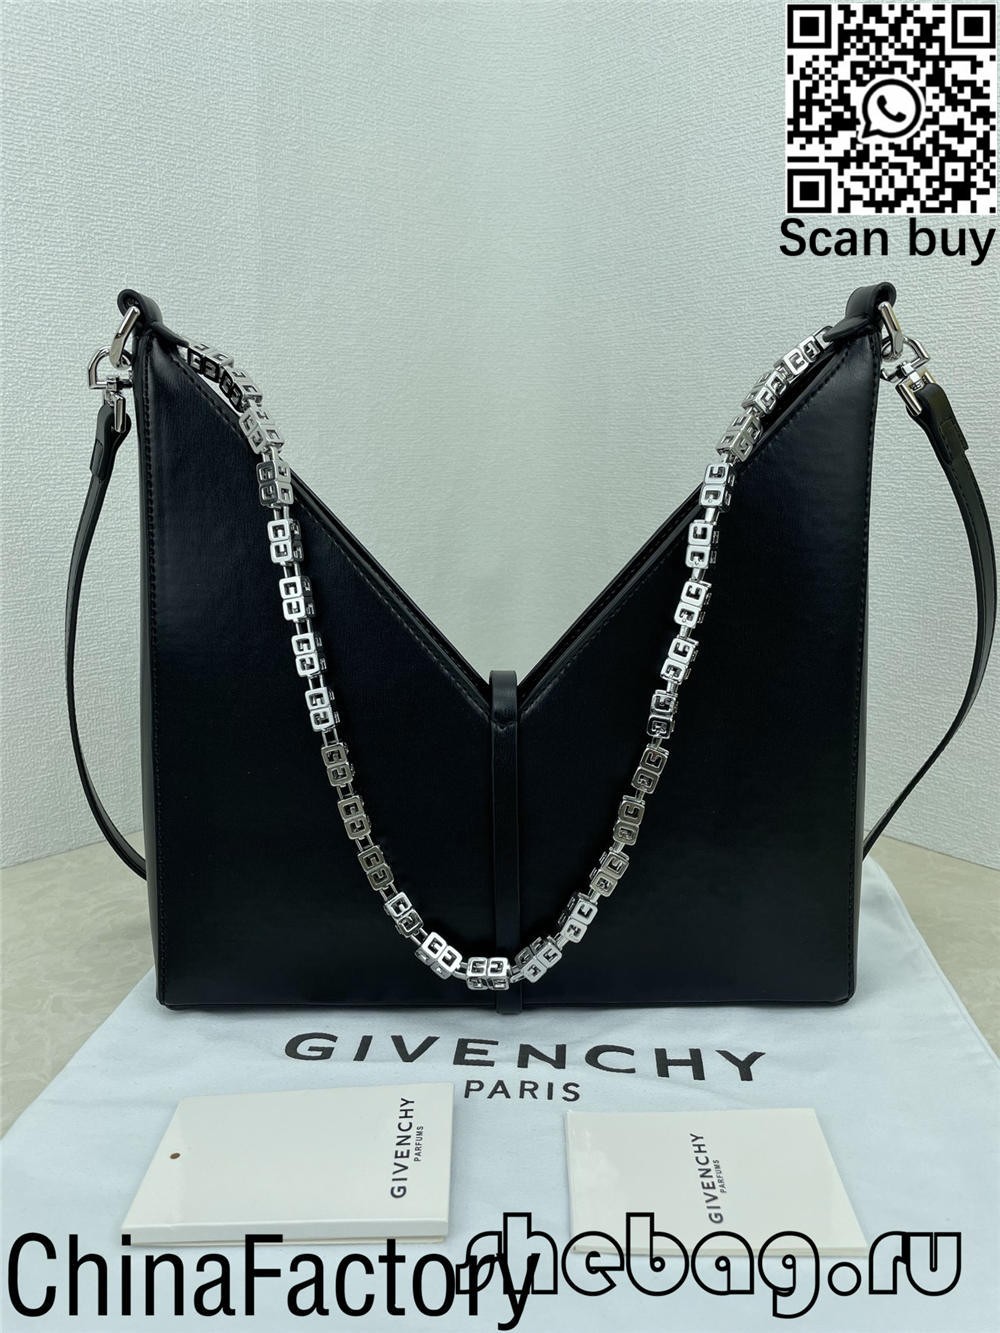 Givenchy black bag replica: Givenchy Cut-Out (2022 updated)-Best Quality Fake Louis Vuitton Bag Online Store, Replica designer bag ru